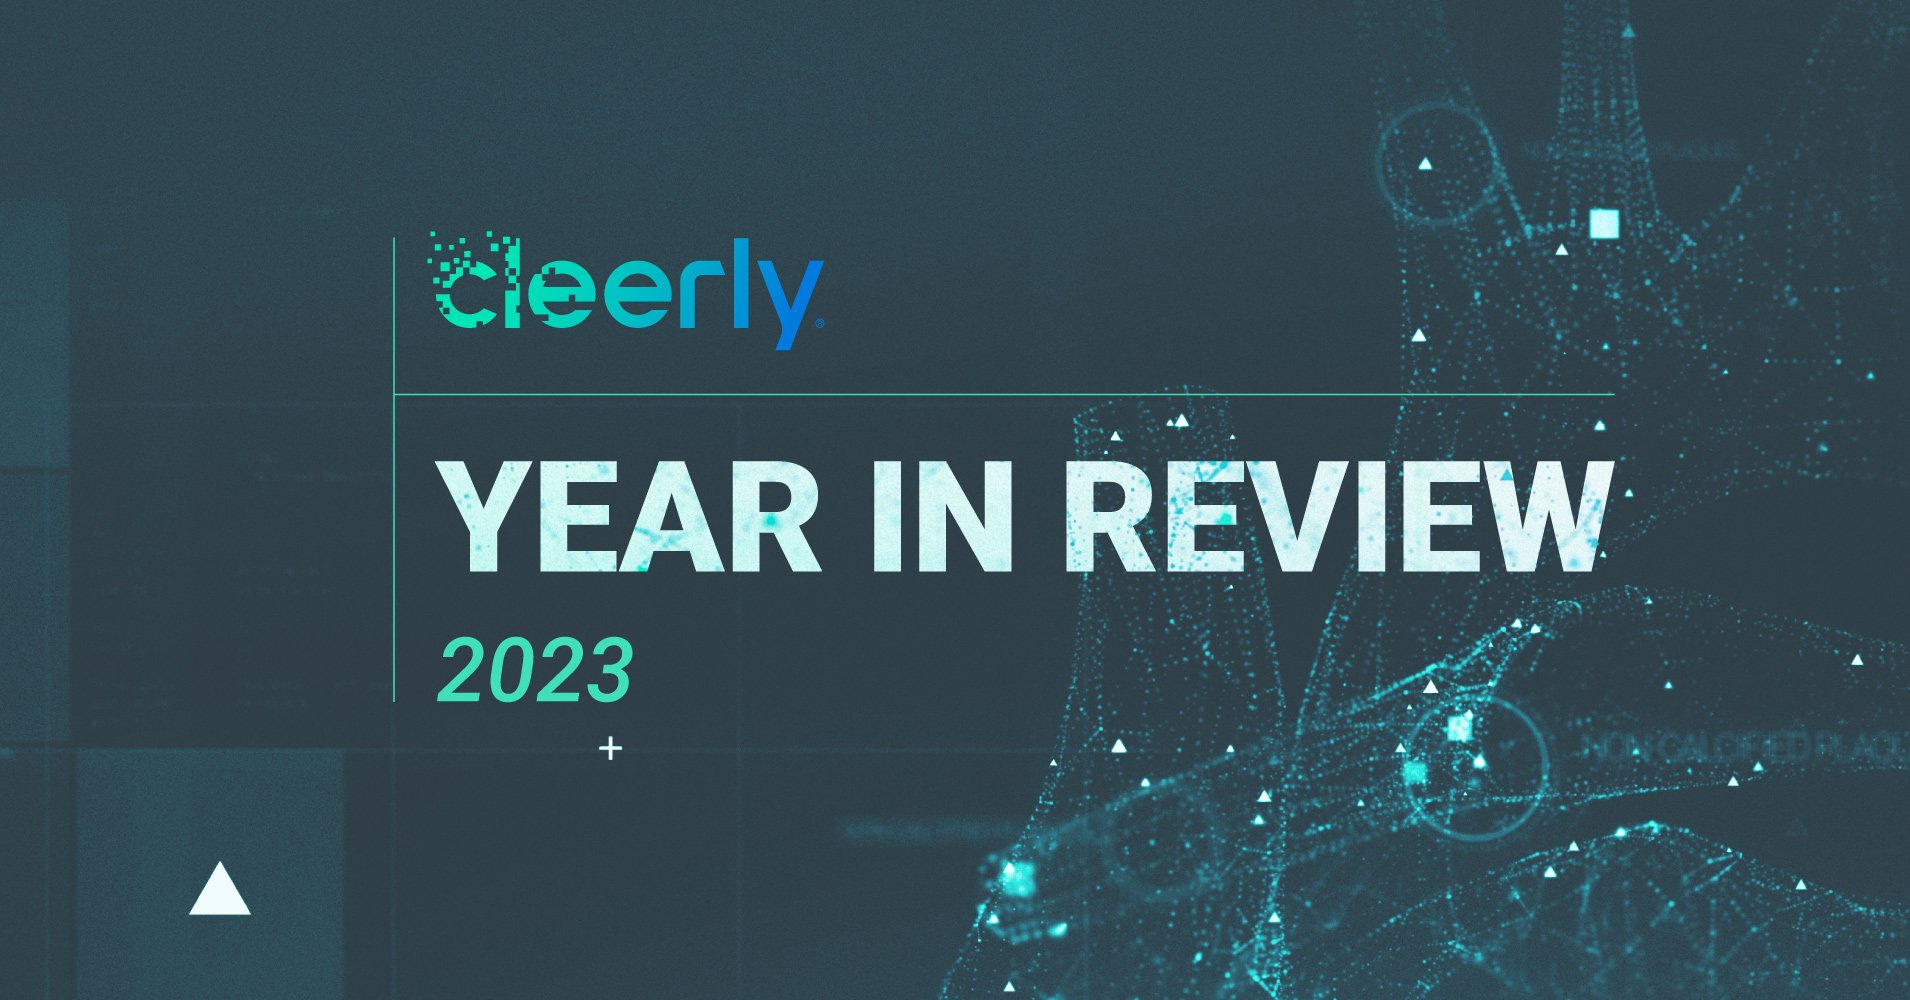 2023 in Review: A Year of Recognition, Growth, and Continuous Innovation at Cleerly